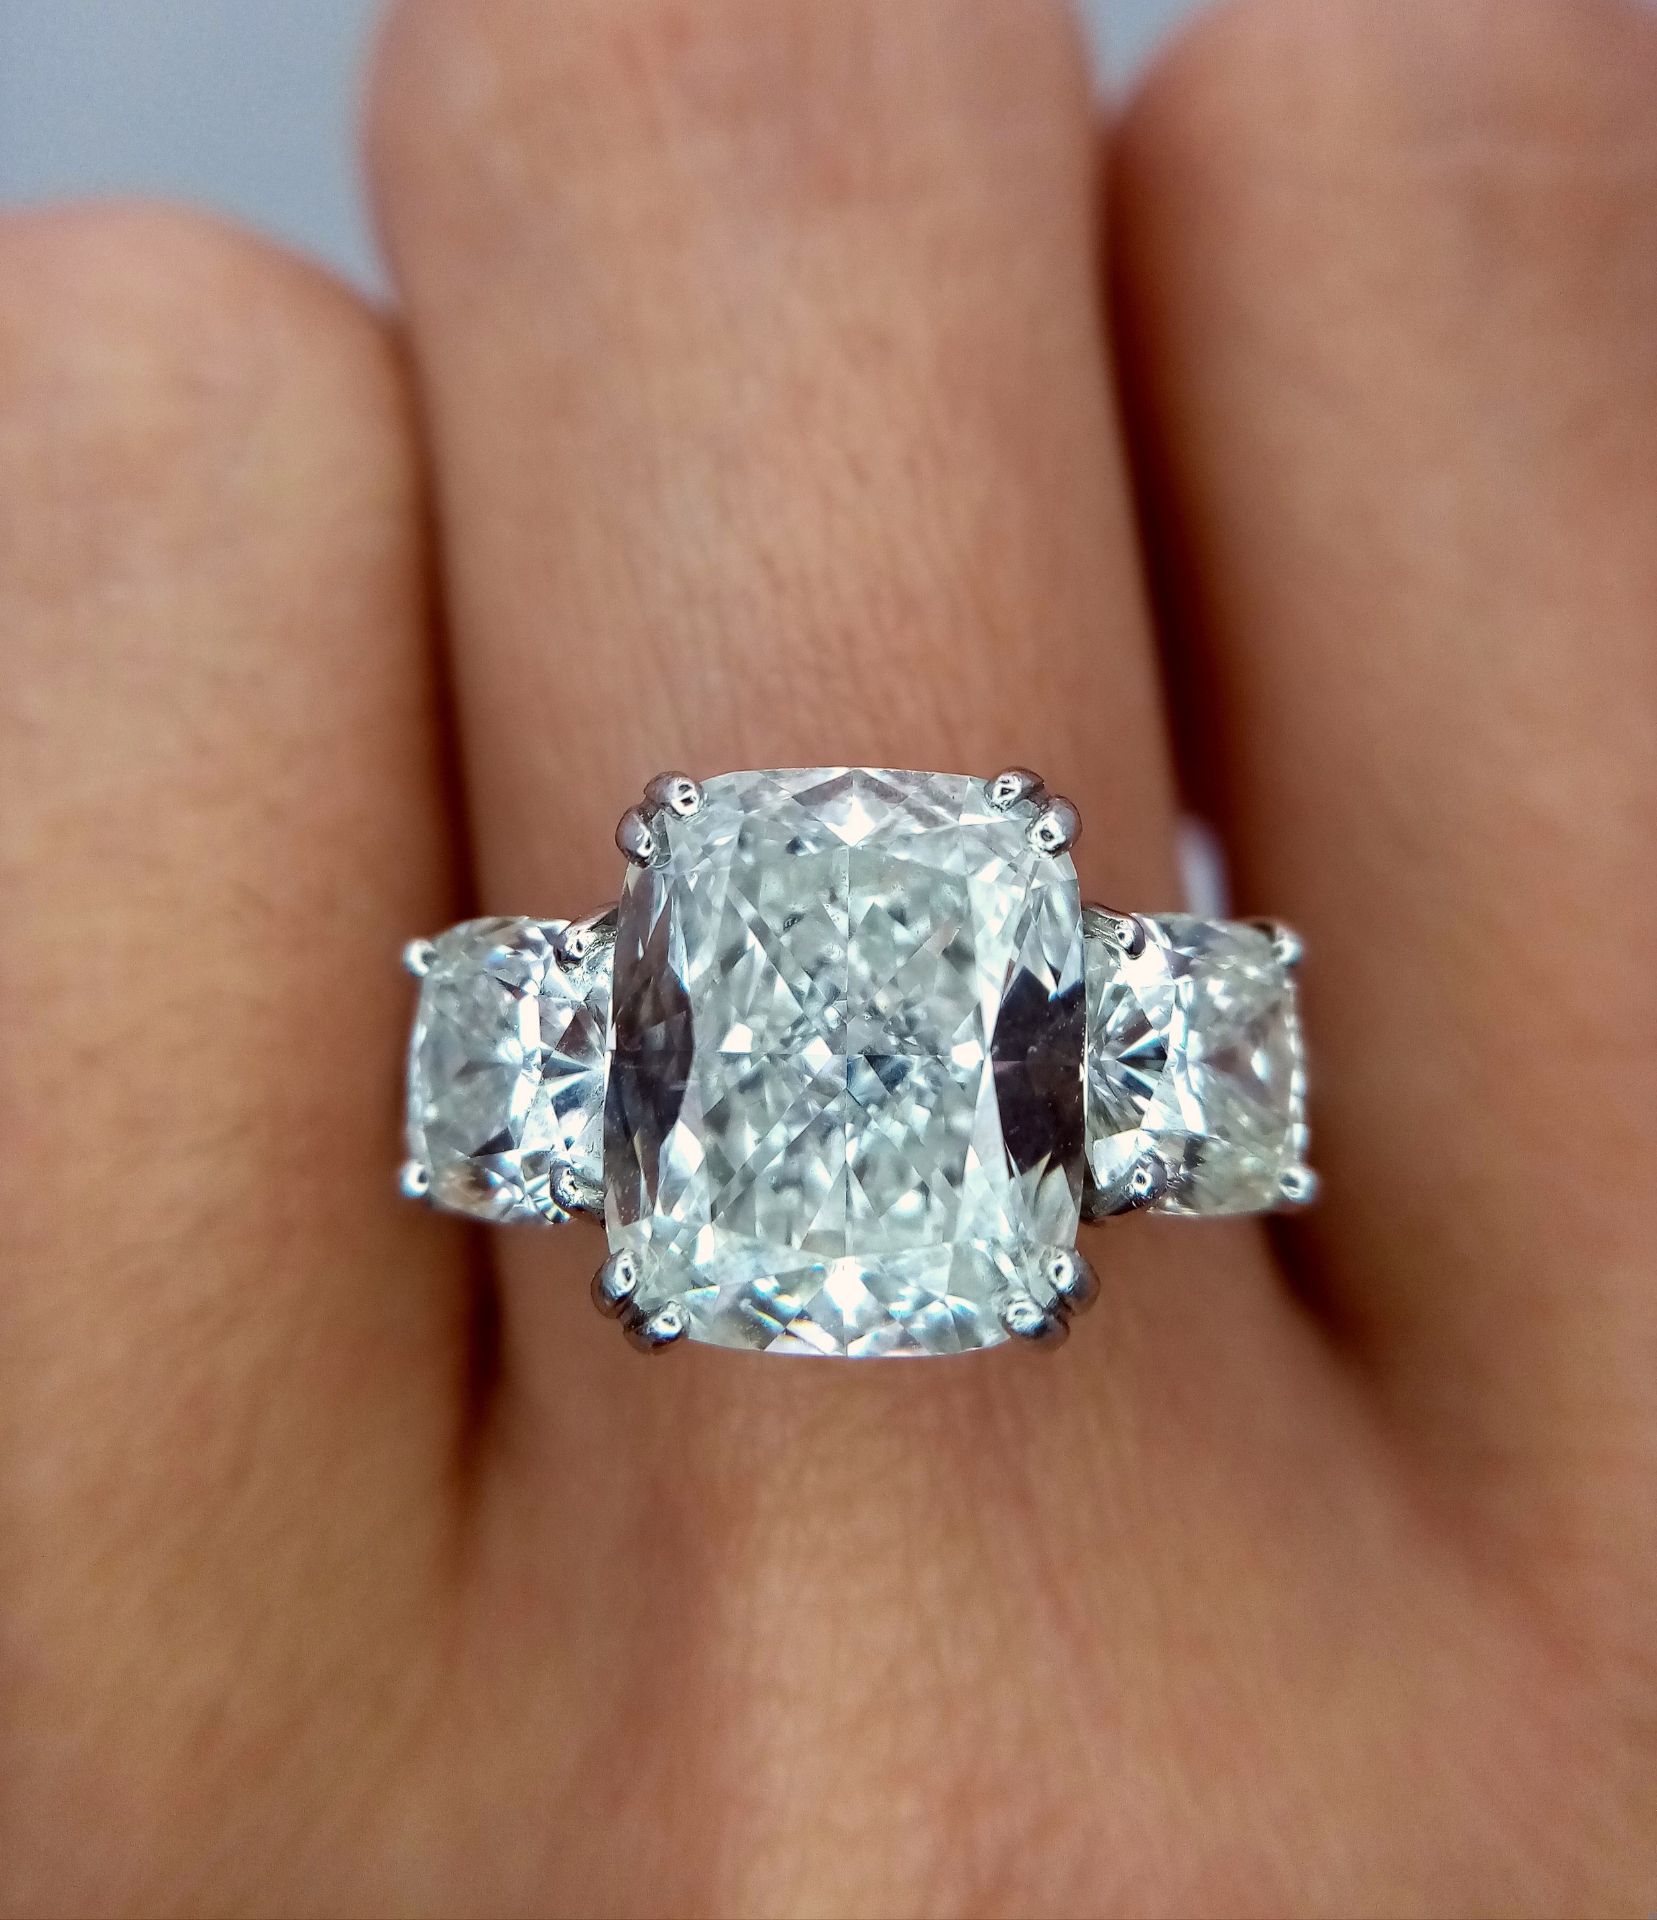 A Breathtaking 4.01ct GIA Certified Diamond Ring. A brilliant cushion cut 4.01ct central diamond - Image 18 of 22